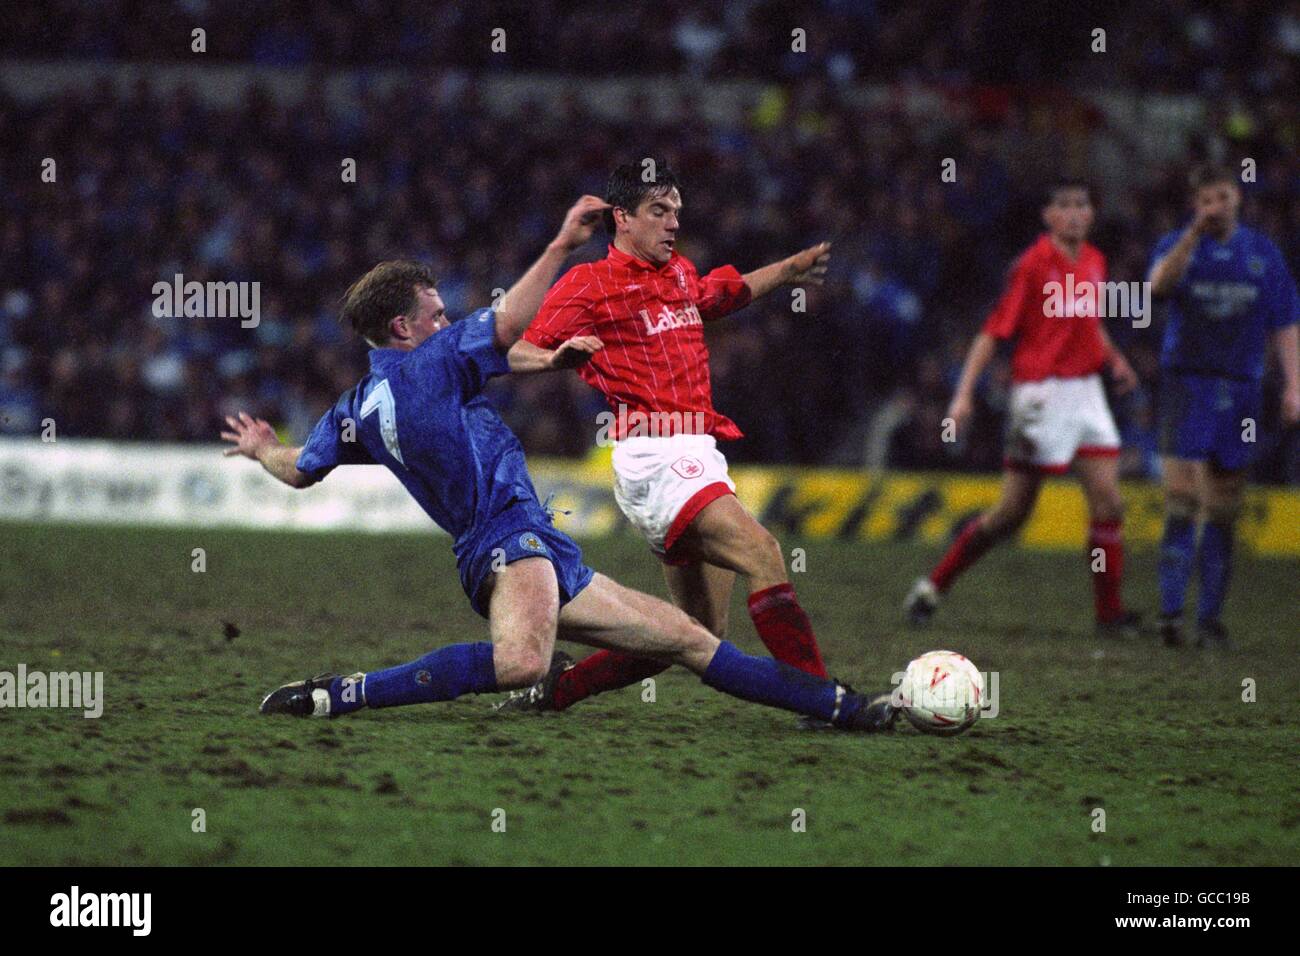 Leicester City's David Oldfield slide tackles Nottingham Forest's Dave Phillips. Stock Photo